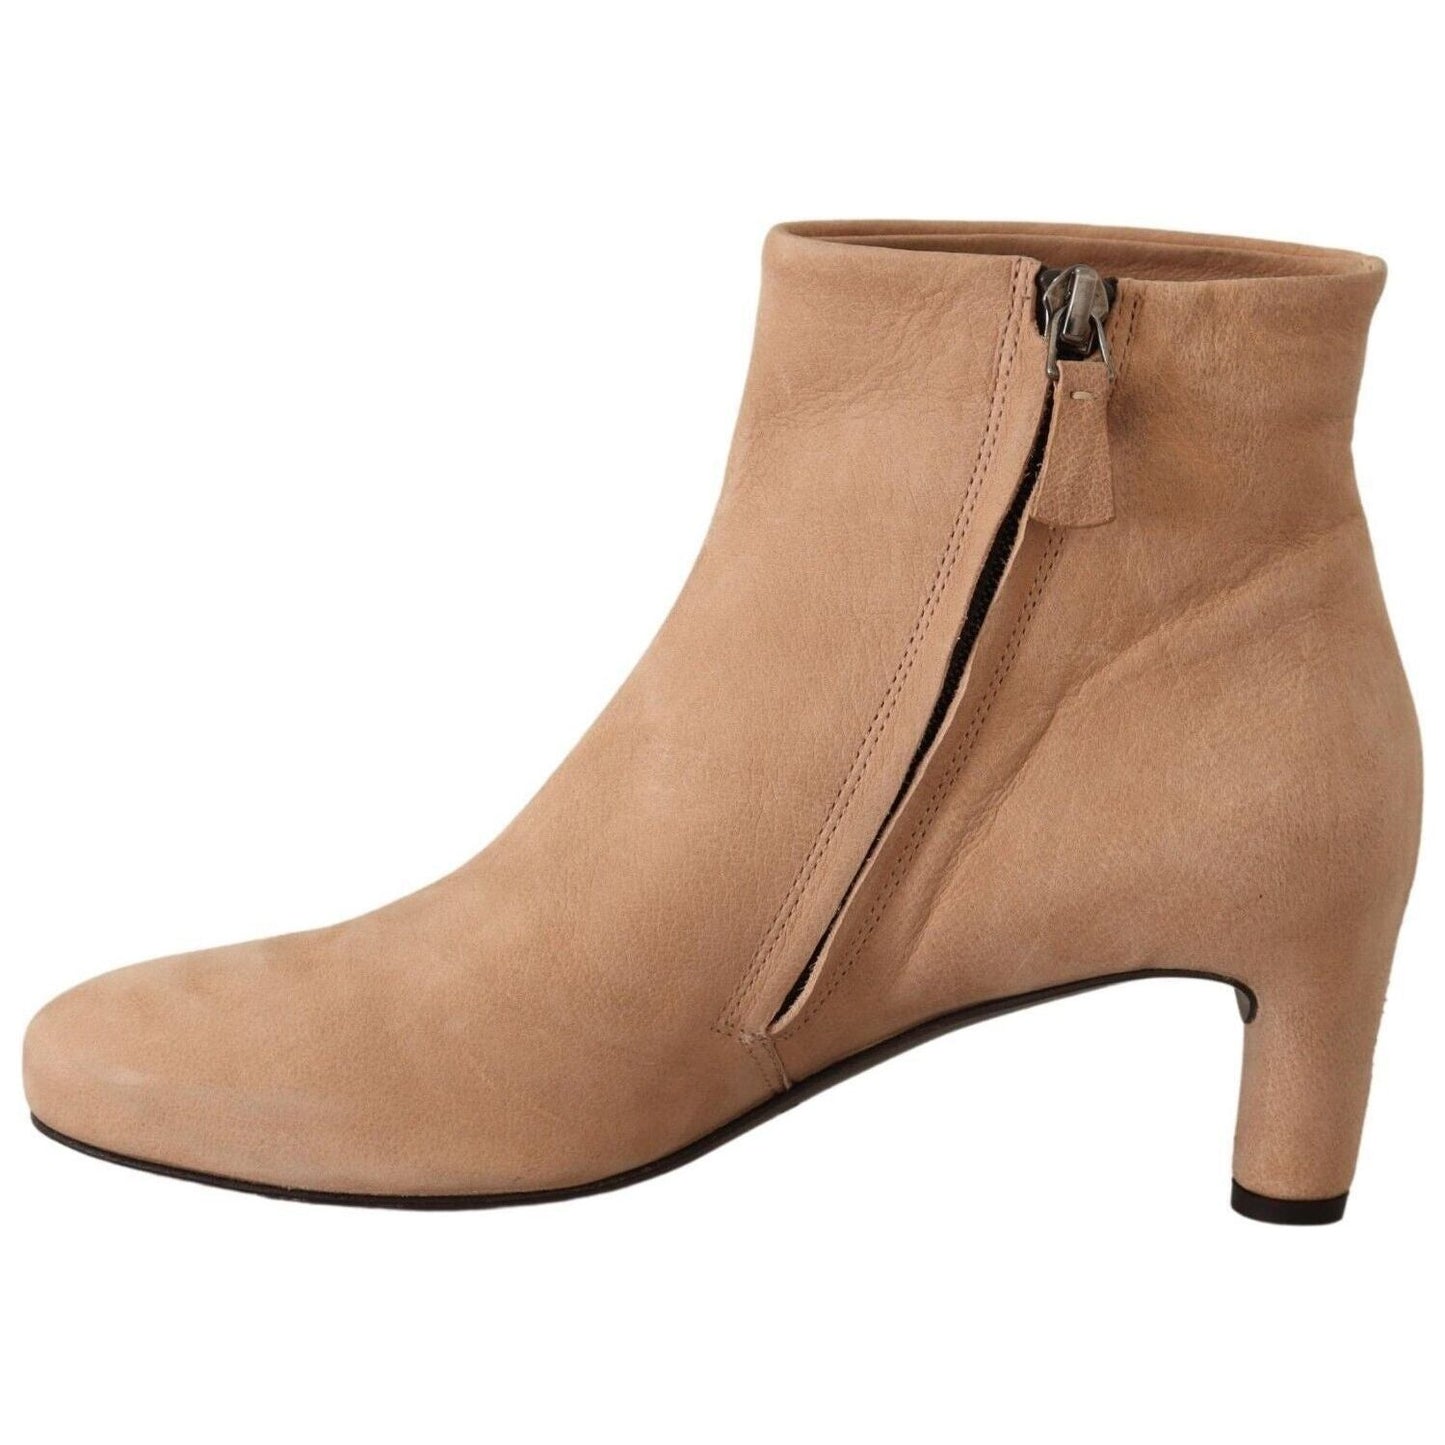 DEL CARLO Elegant Beige Leather Boots beige-suede-leather-mid-heels-pumps-boots-shoes WOMAN BOOTS s-l1600-1-181-238516af-84a.jpg